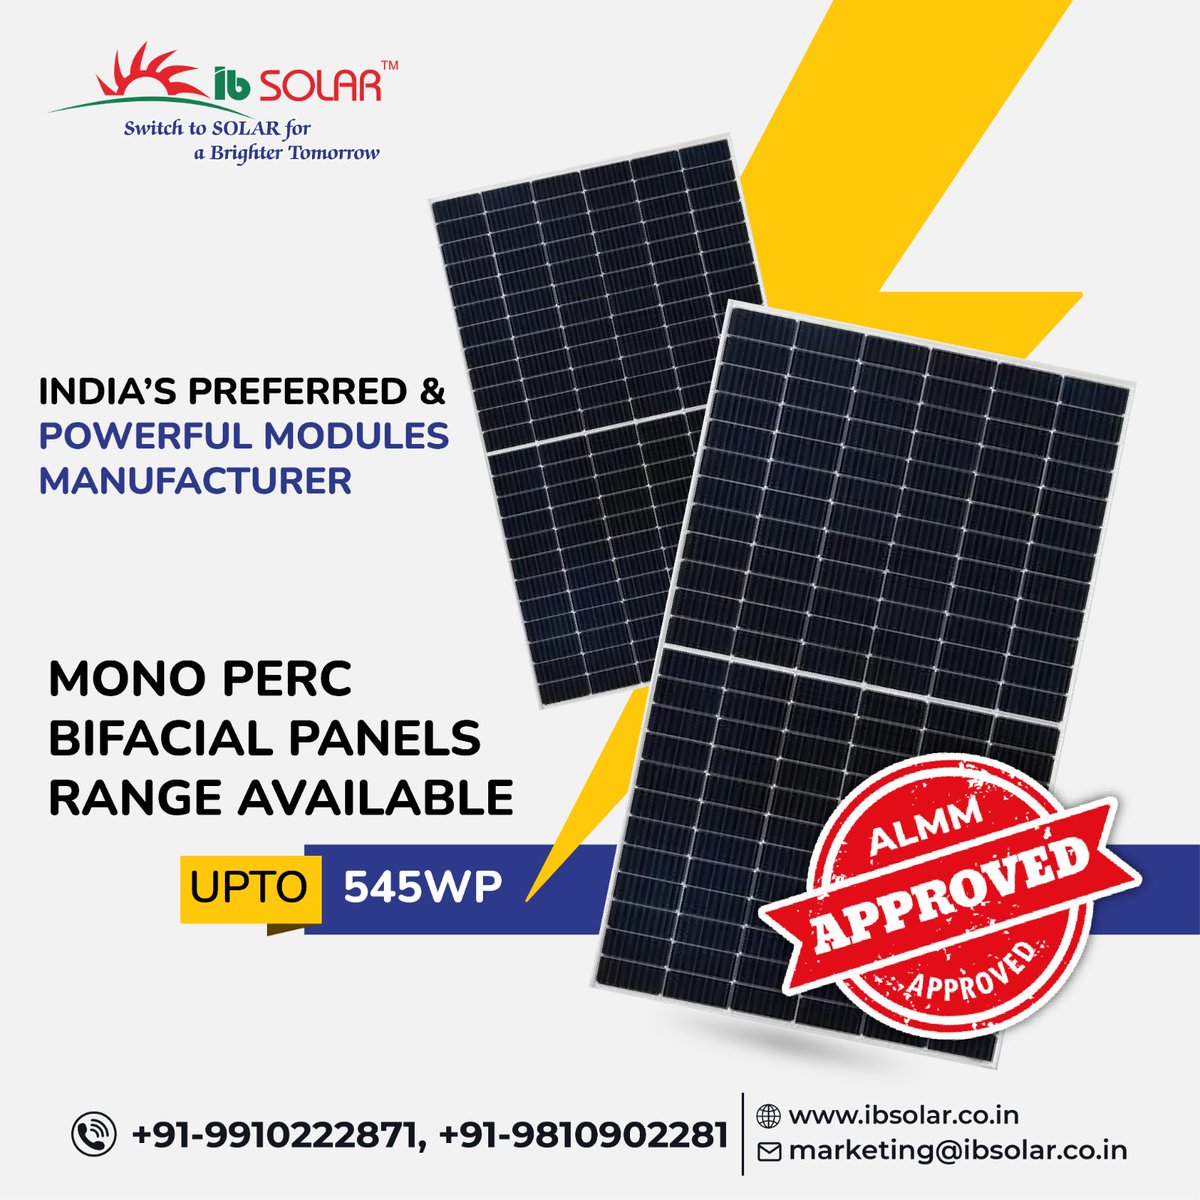 Explore our range of high-efficiency mono PERC bifacial panels, now ALMM approved. Reach up to 545WP and unleash unparalleled performance. 

Visit our products : ibsolar.co.in/solar_panels.p…
Or call us at +919910222871, + 9810902281

#monoperc #sustainability #solarpanel #ibsolar